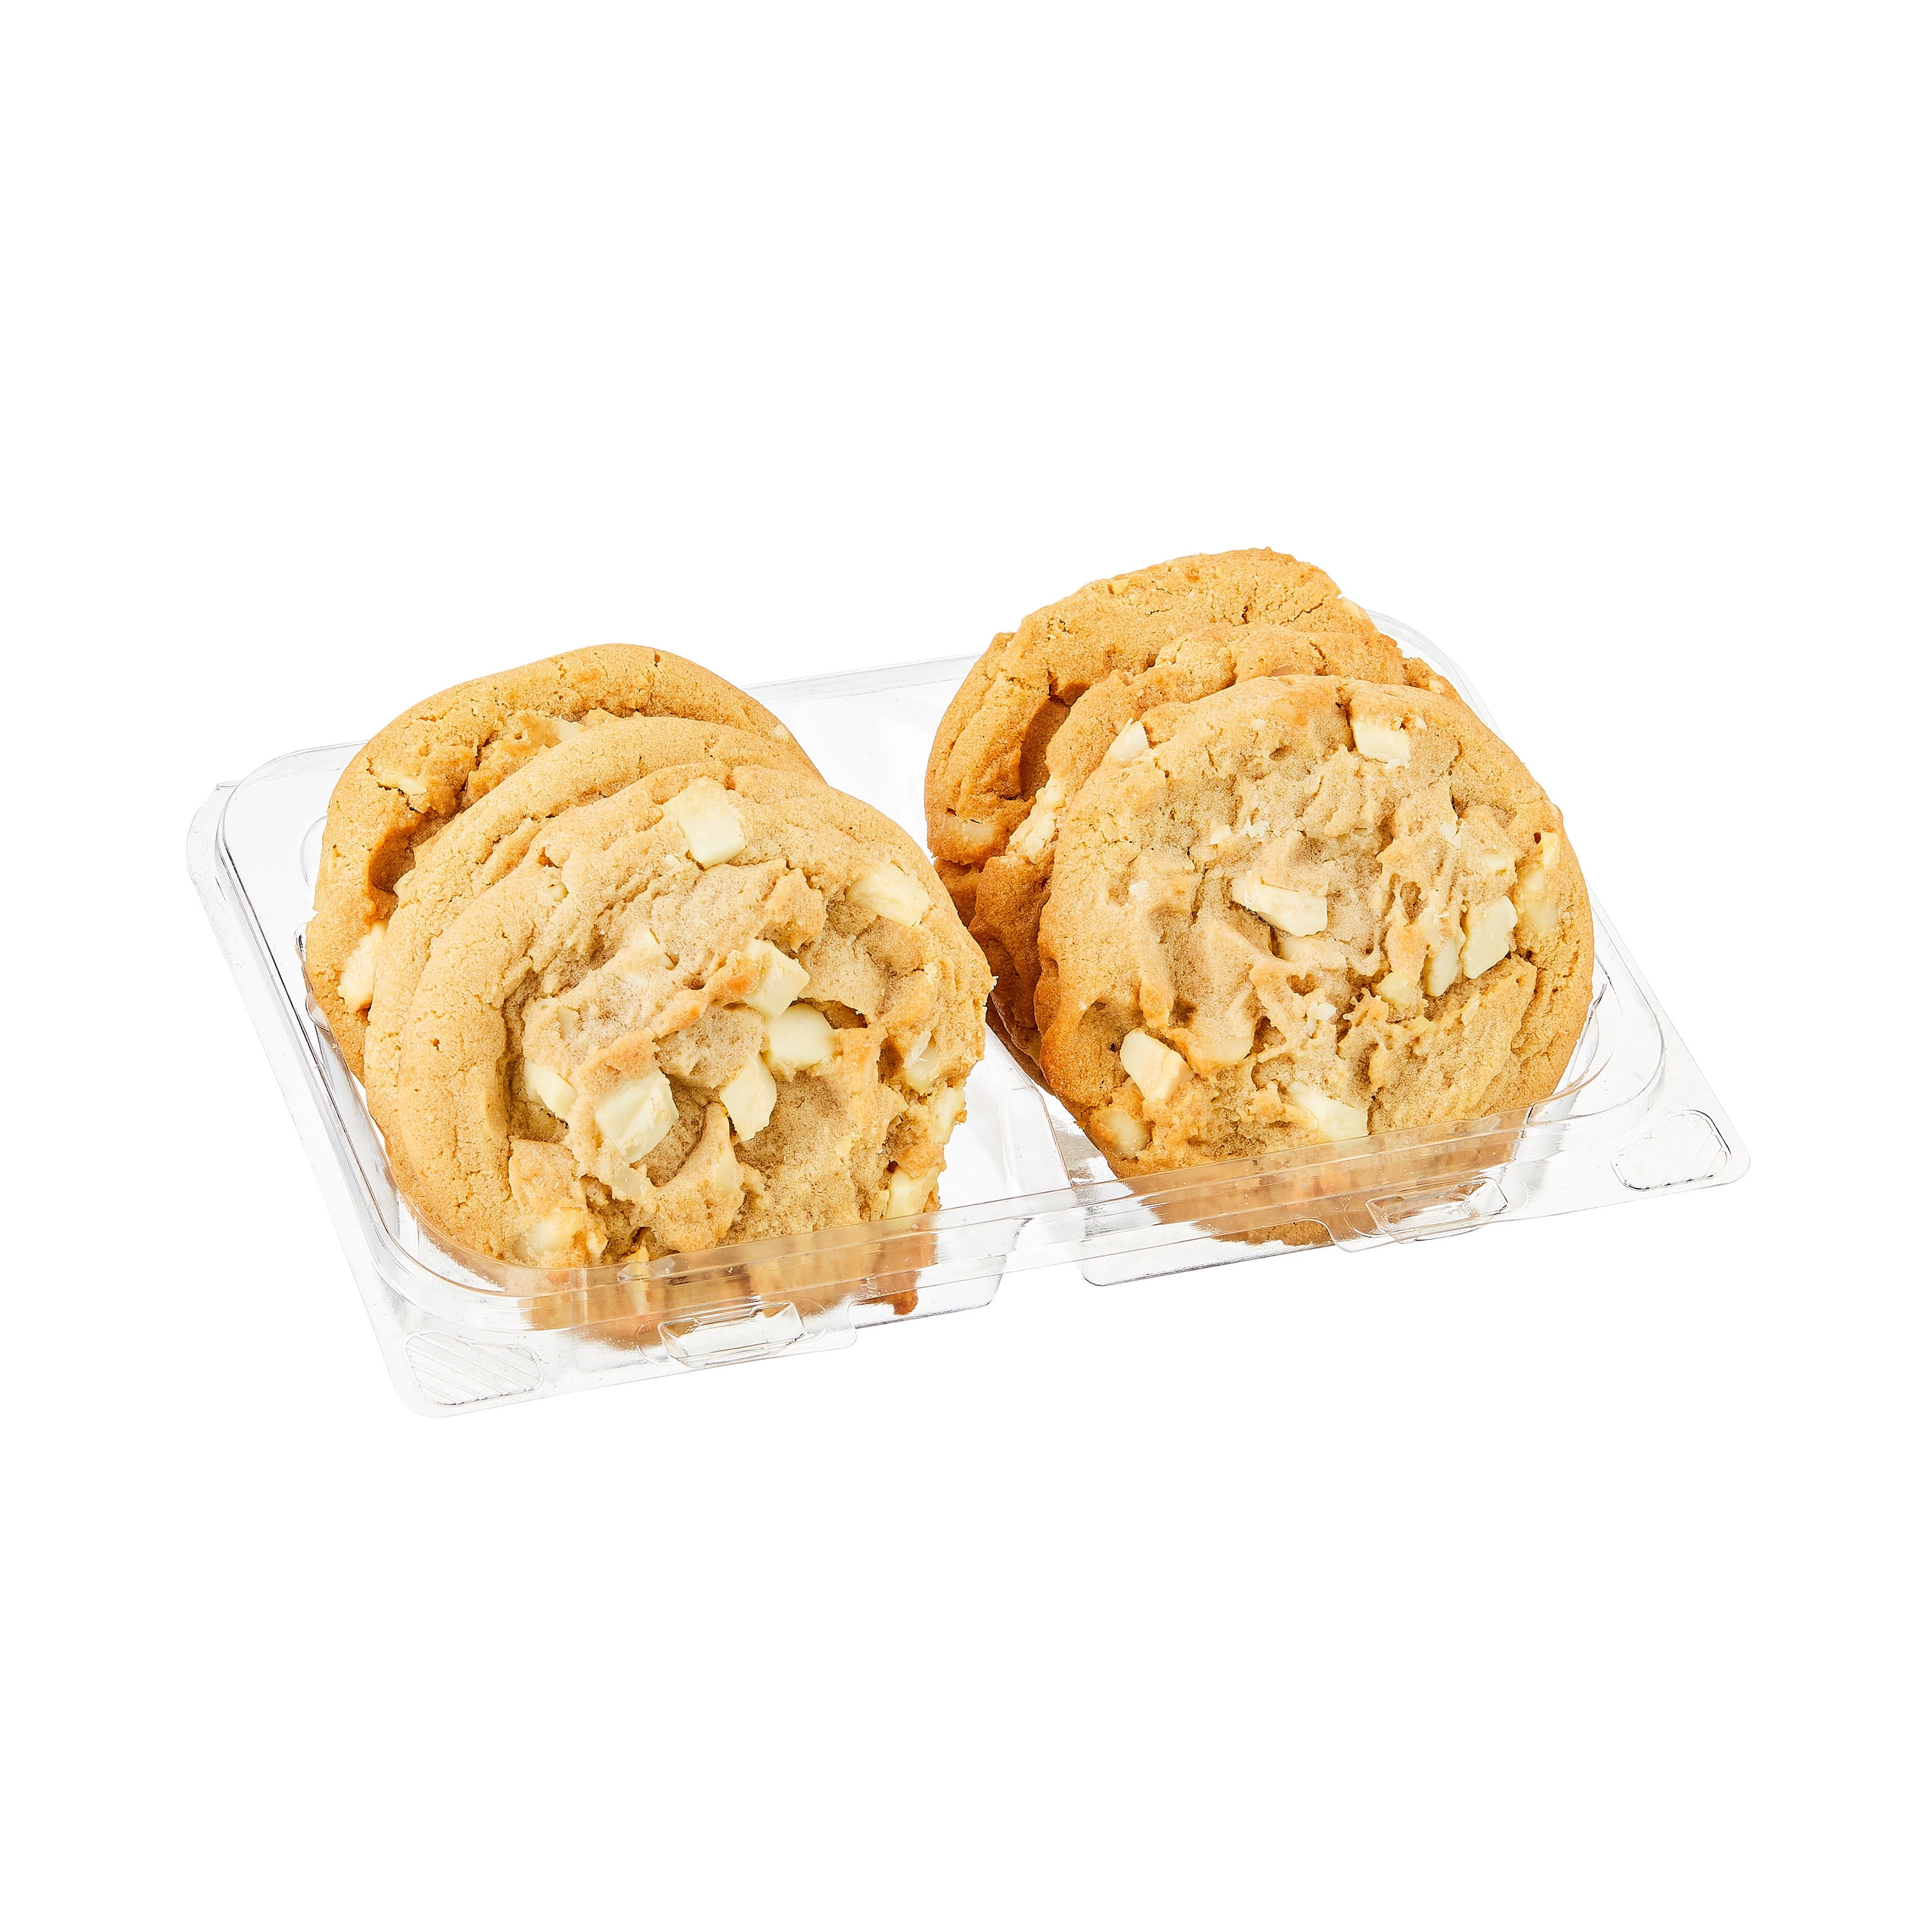 Classic Cookie Soft Baked Macadamia Nut Cookies Made with Hershey's White Chocolate Chips, 4 Boxes, 32 Individually Wrapped Cookies